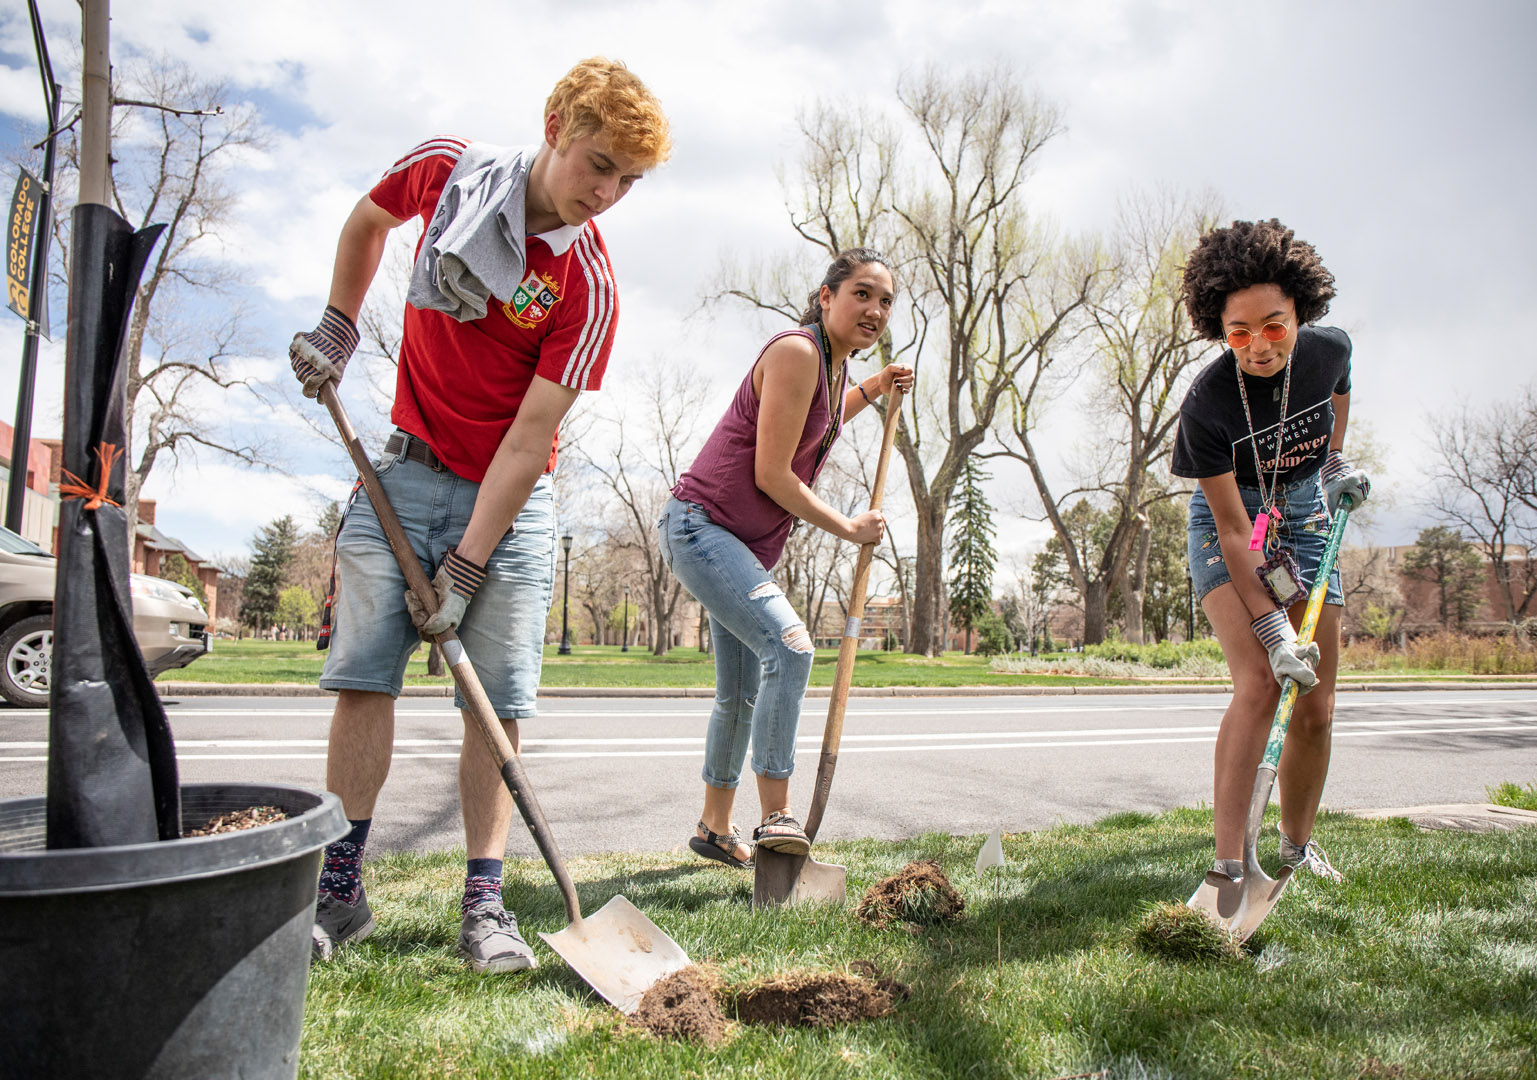 To celebrate Earth Week the Office of Sustainability and the Grounds Crew hosted tree planting activities for students to help with on Arbor Day. Students were invited to help dig holes and plant trees along Cascade Avenue. <strong>Finlay Roberts ’22</strong>,  <strong>Emma Ulbrich ’22</strong> and <strong>Chidera Ikpeamarom ’22</strong> dig a hole for the tree they are planting. Photo by Jennifer Coombes